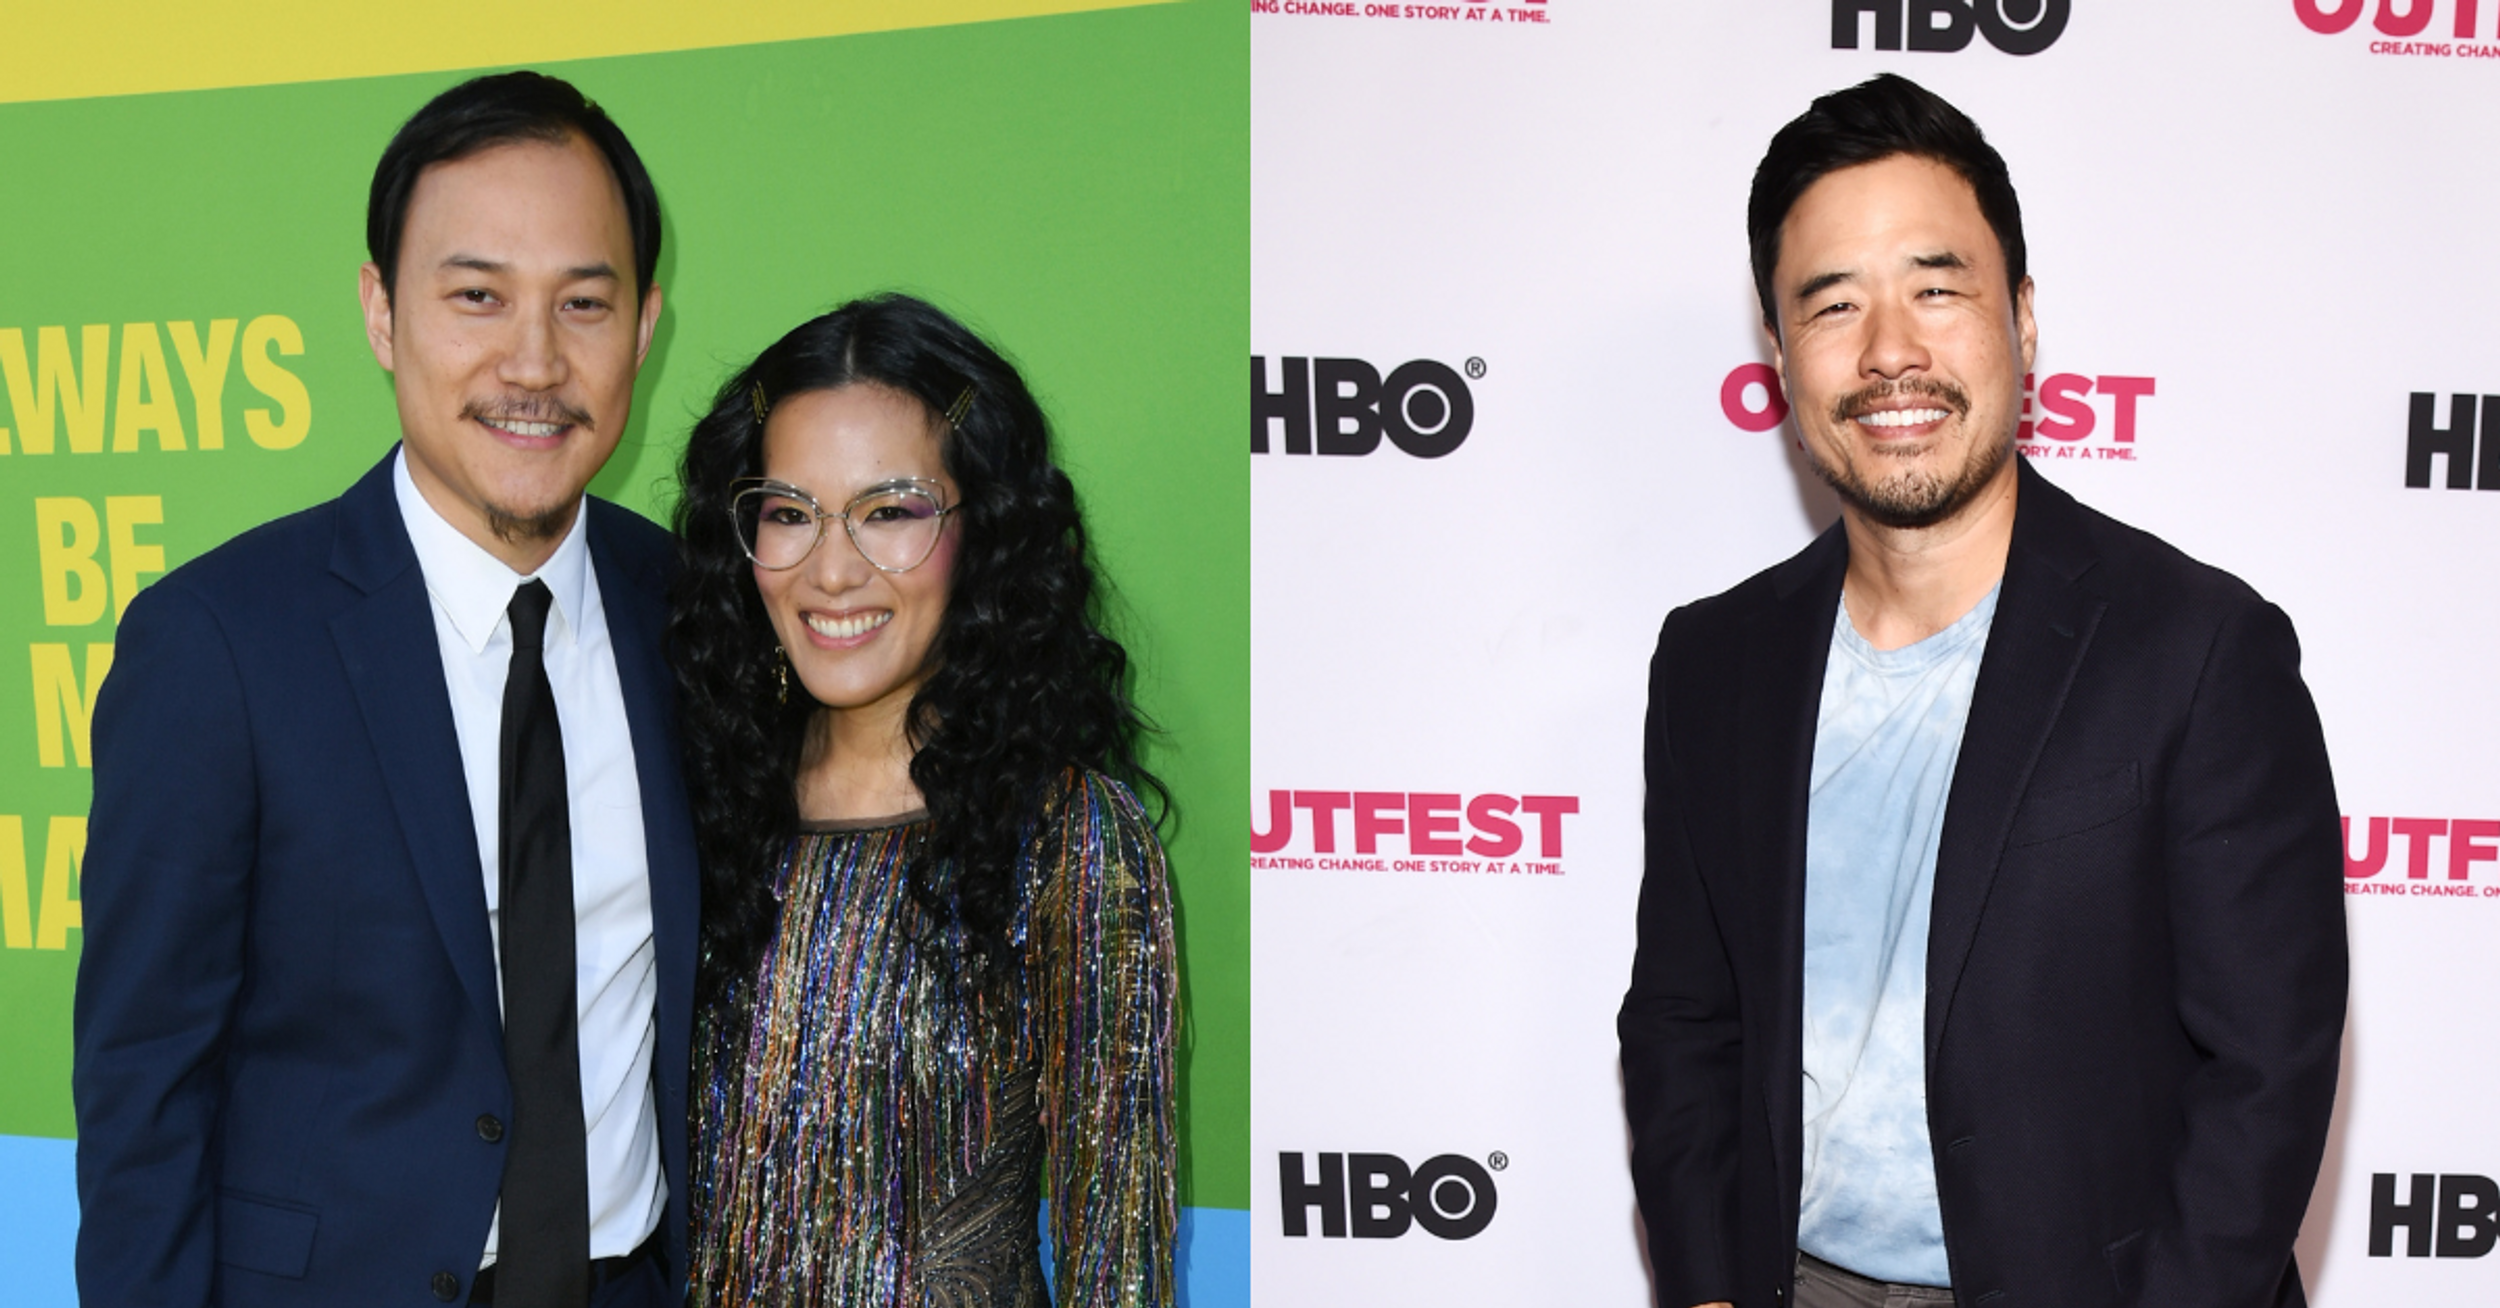 News Outlets Called Out After Misidentifying Randall Park As Ali Wong's Soon-To-Be Ex Husband